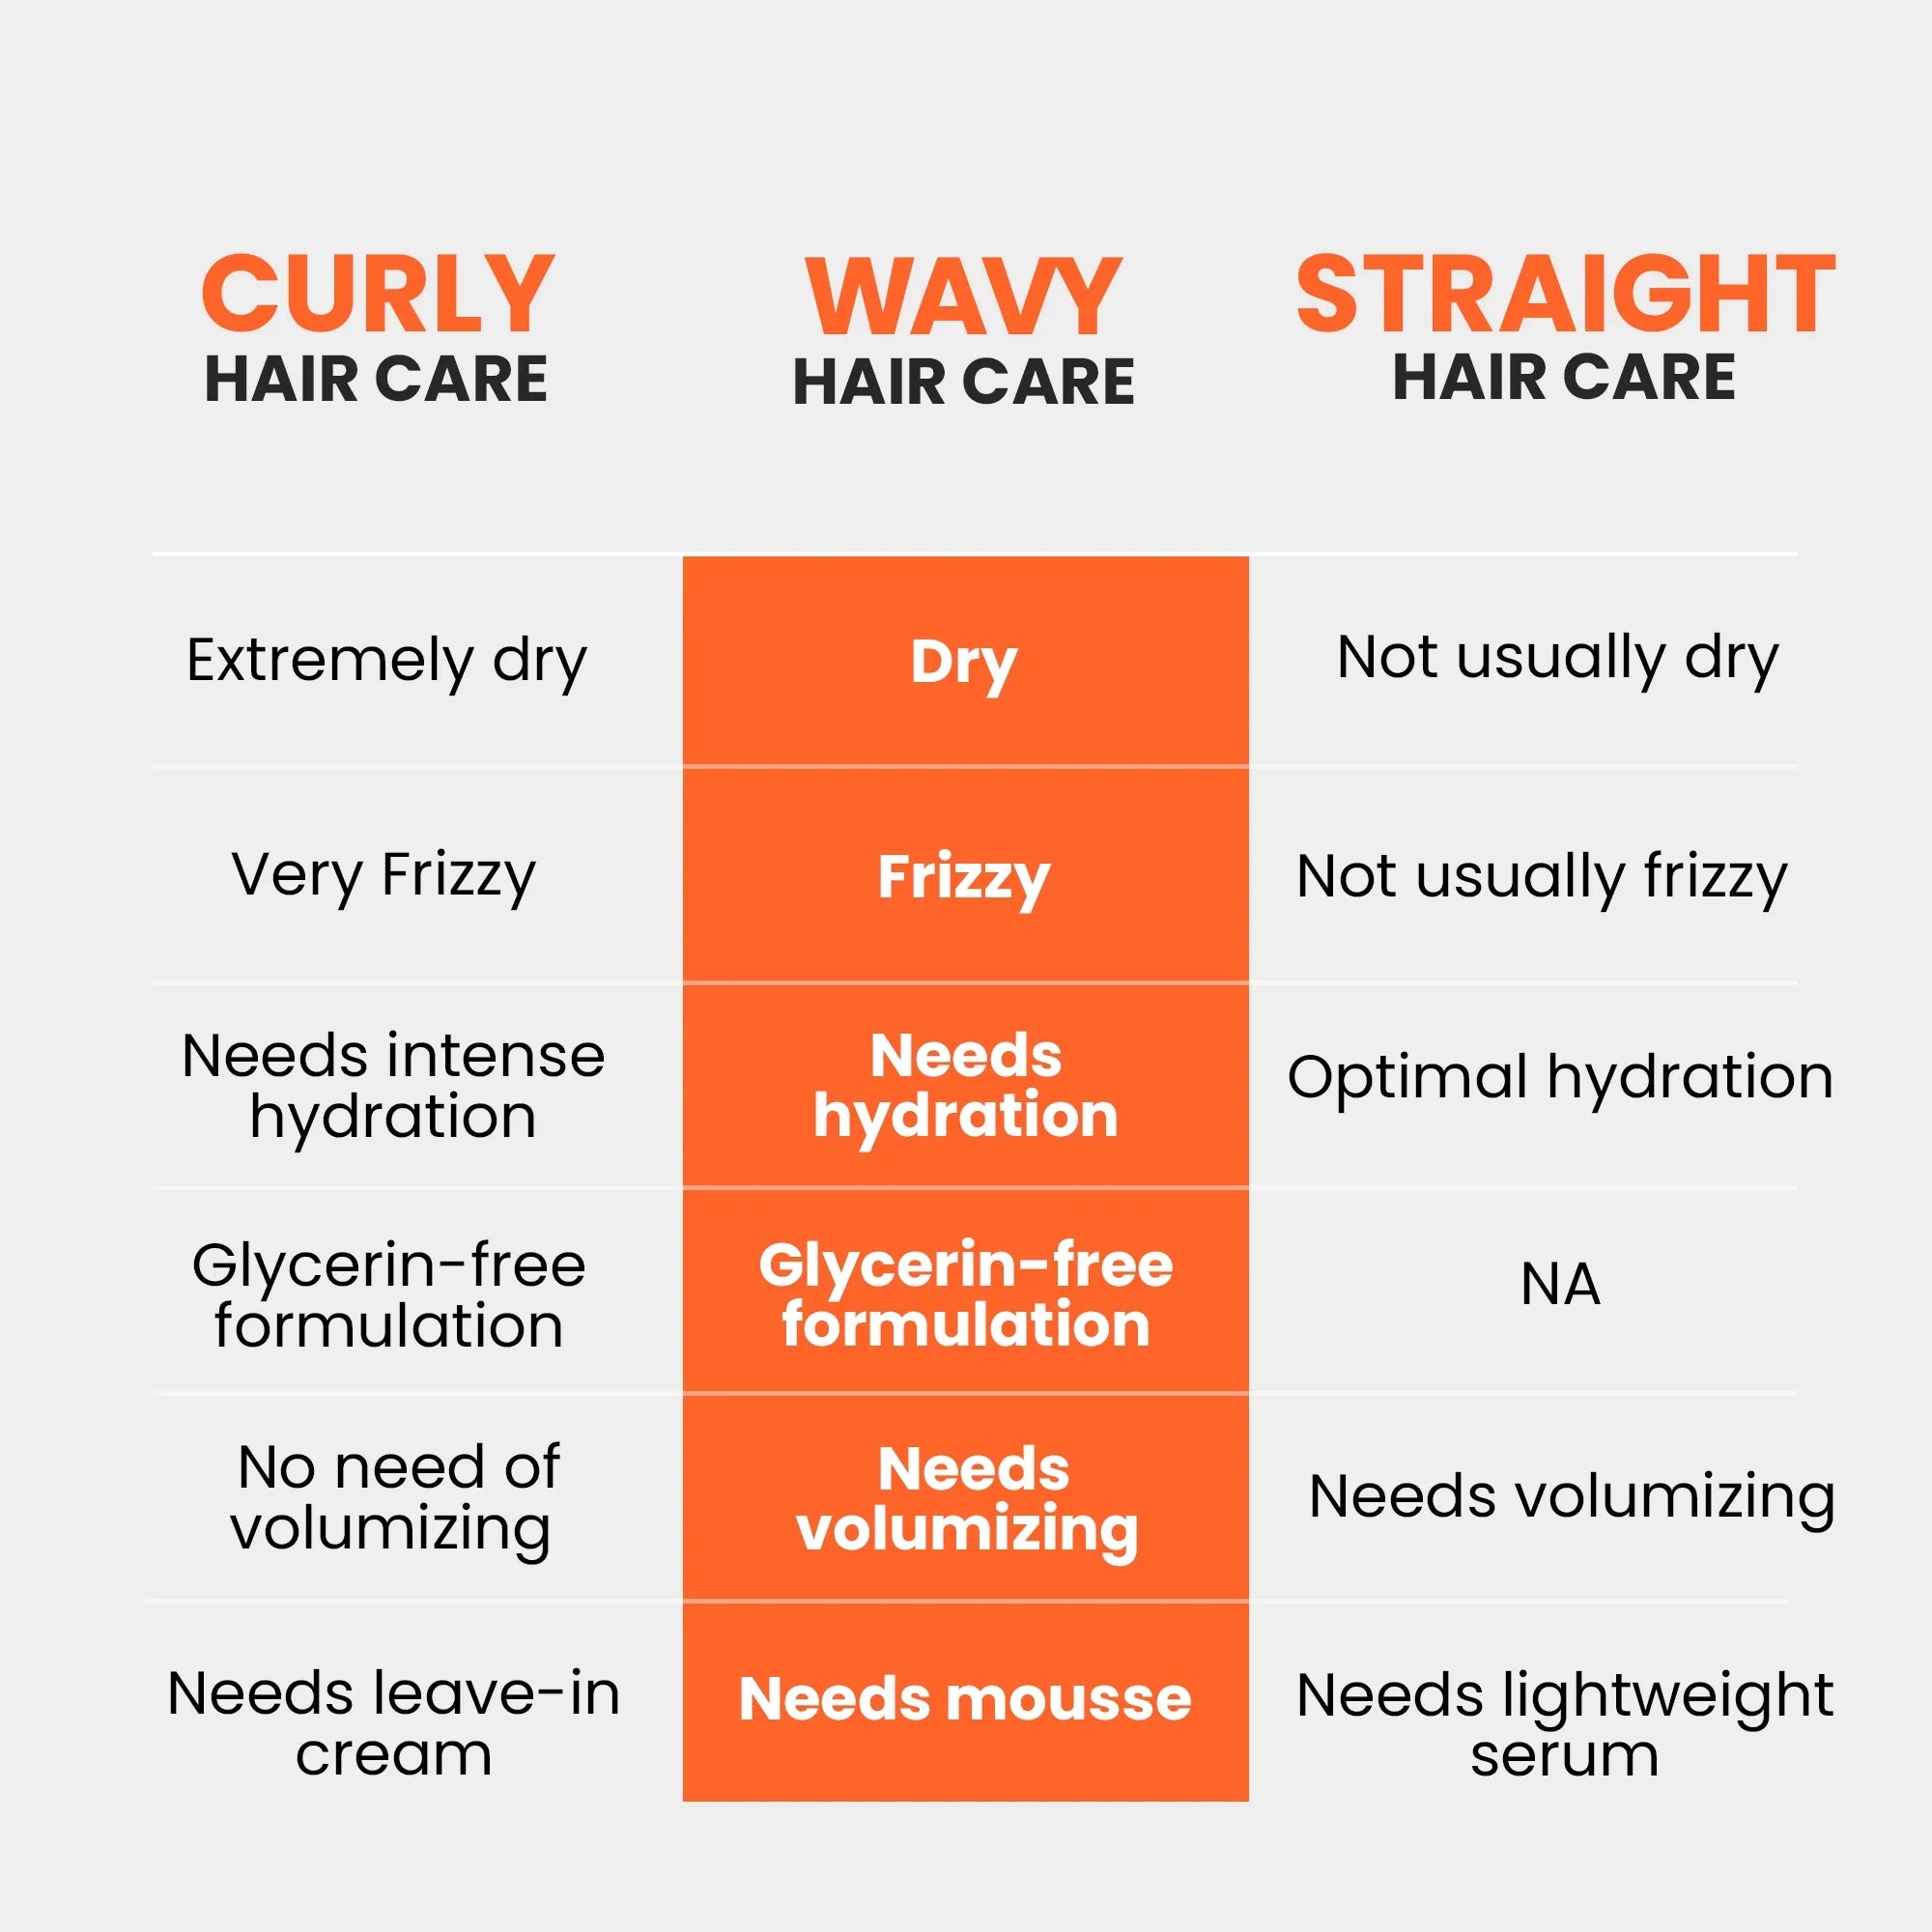 you need different shampoo for wavy hair care beacuse it is different from curly & straight hair care